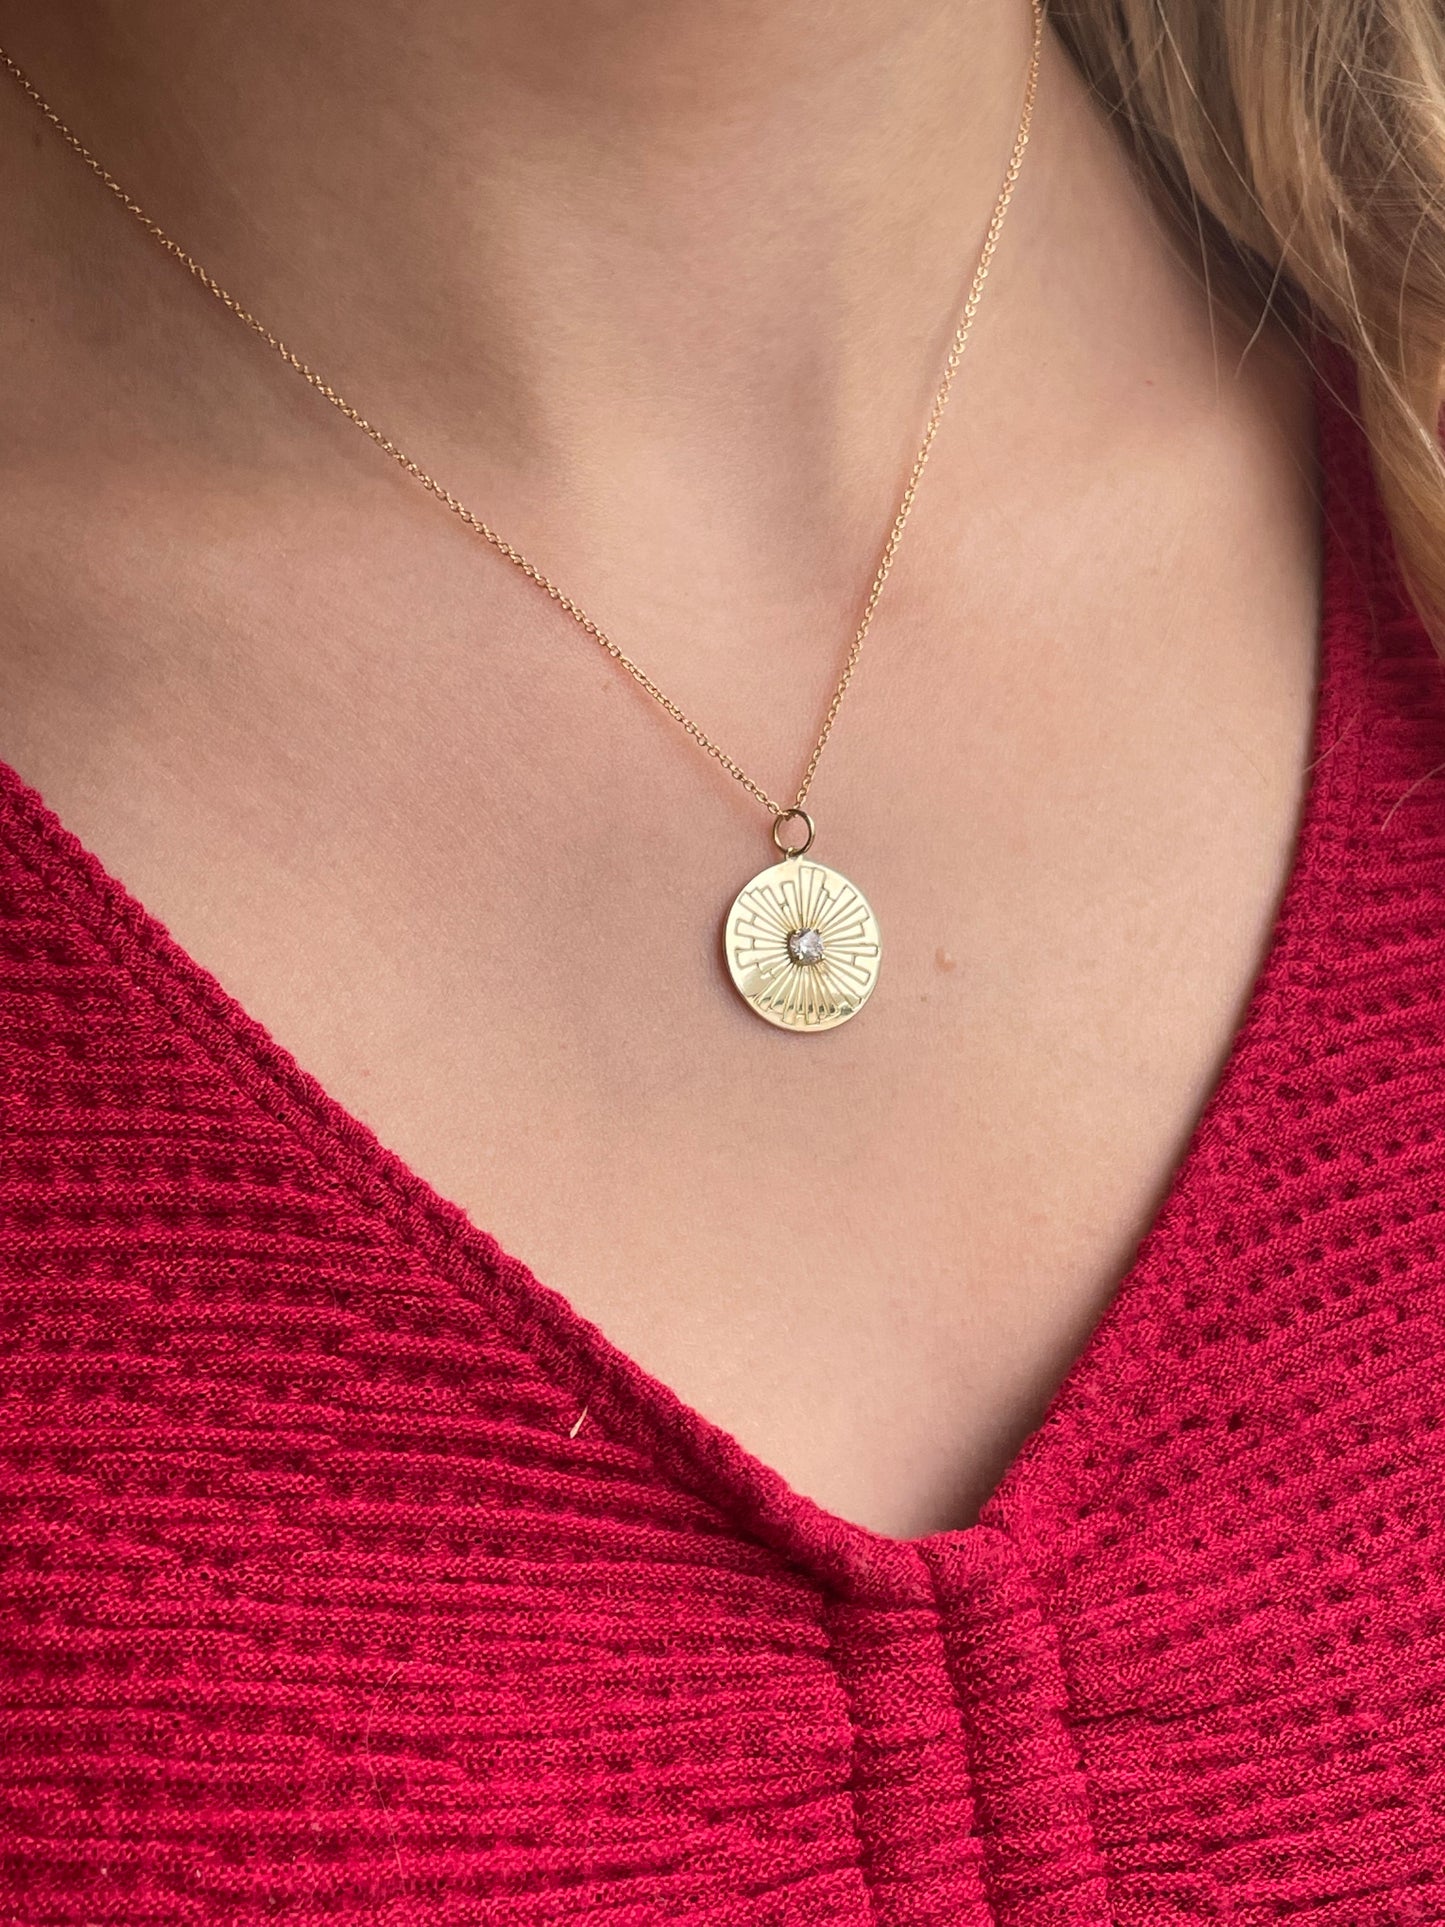 9ct Gold Sunrays Disc Necklace - John Ross Jewellers